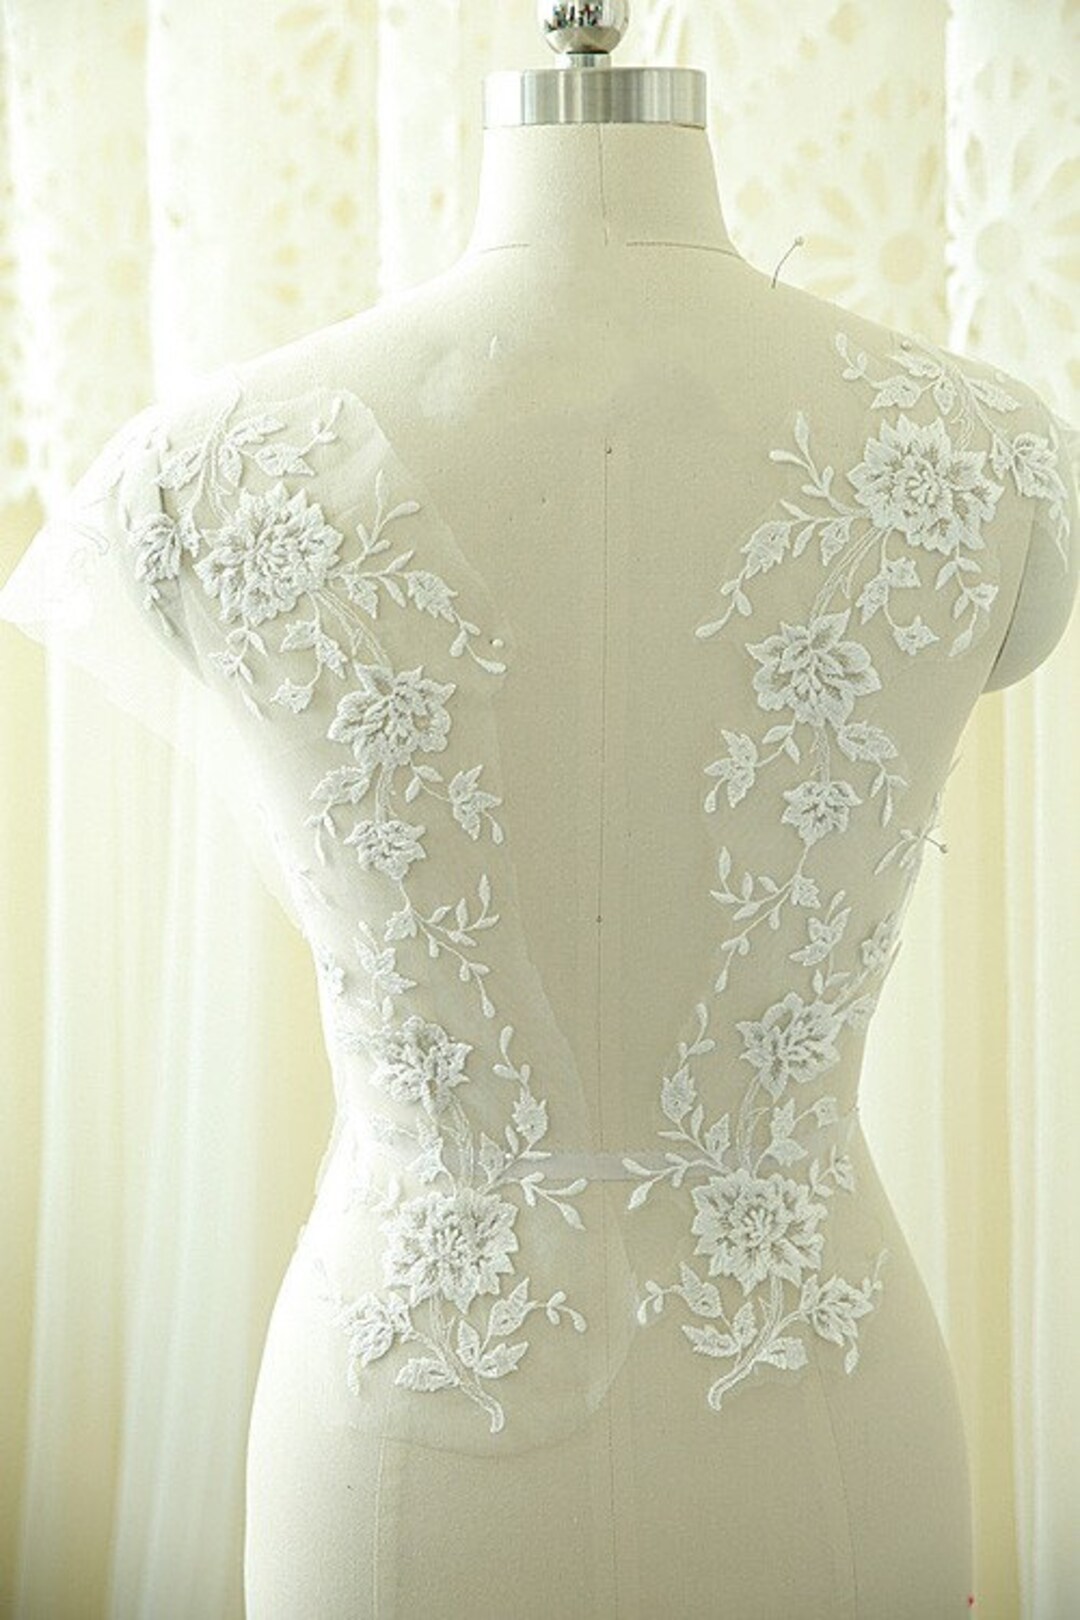 Ivory Collar Lace Appliques Embroidery Tulle Trim Collar - Etsy